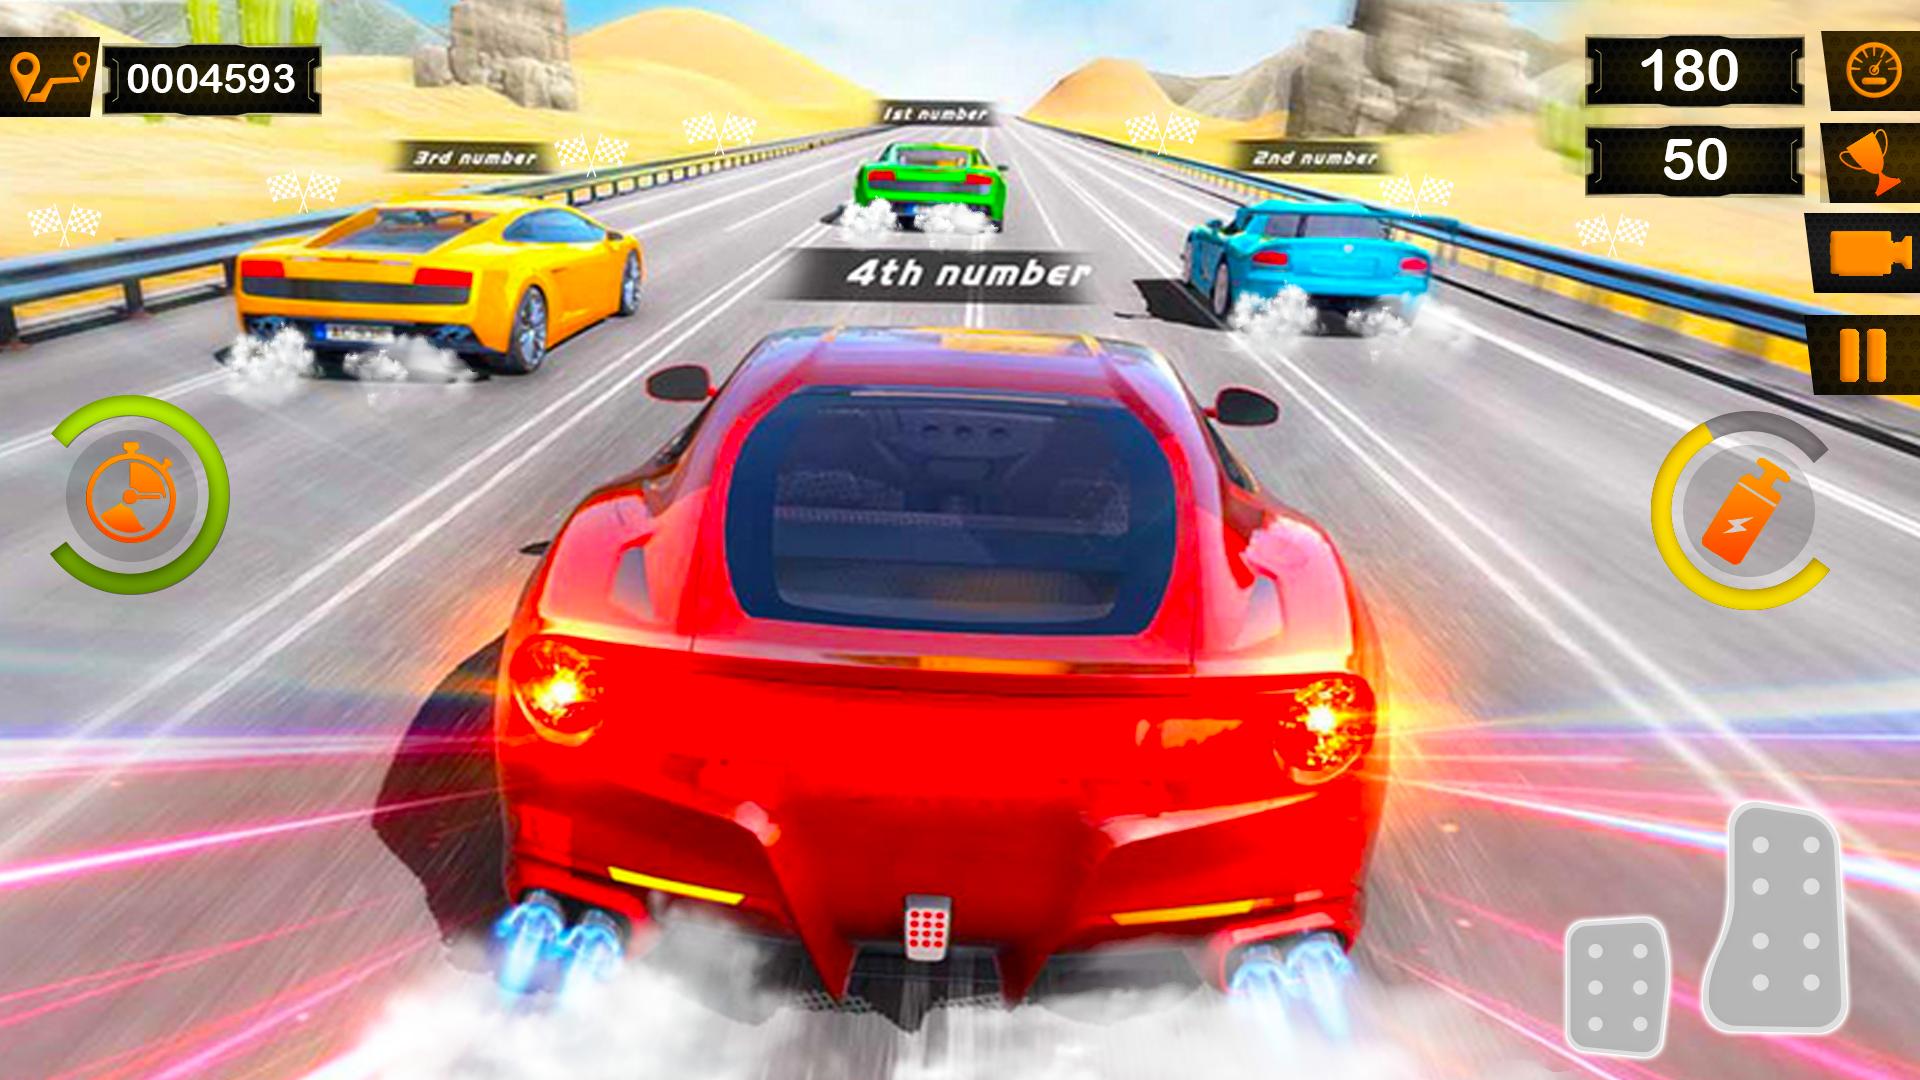 Crazy Drive - Highway Racer for Android - APK Download